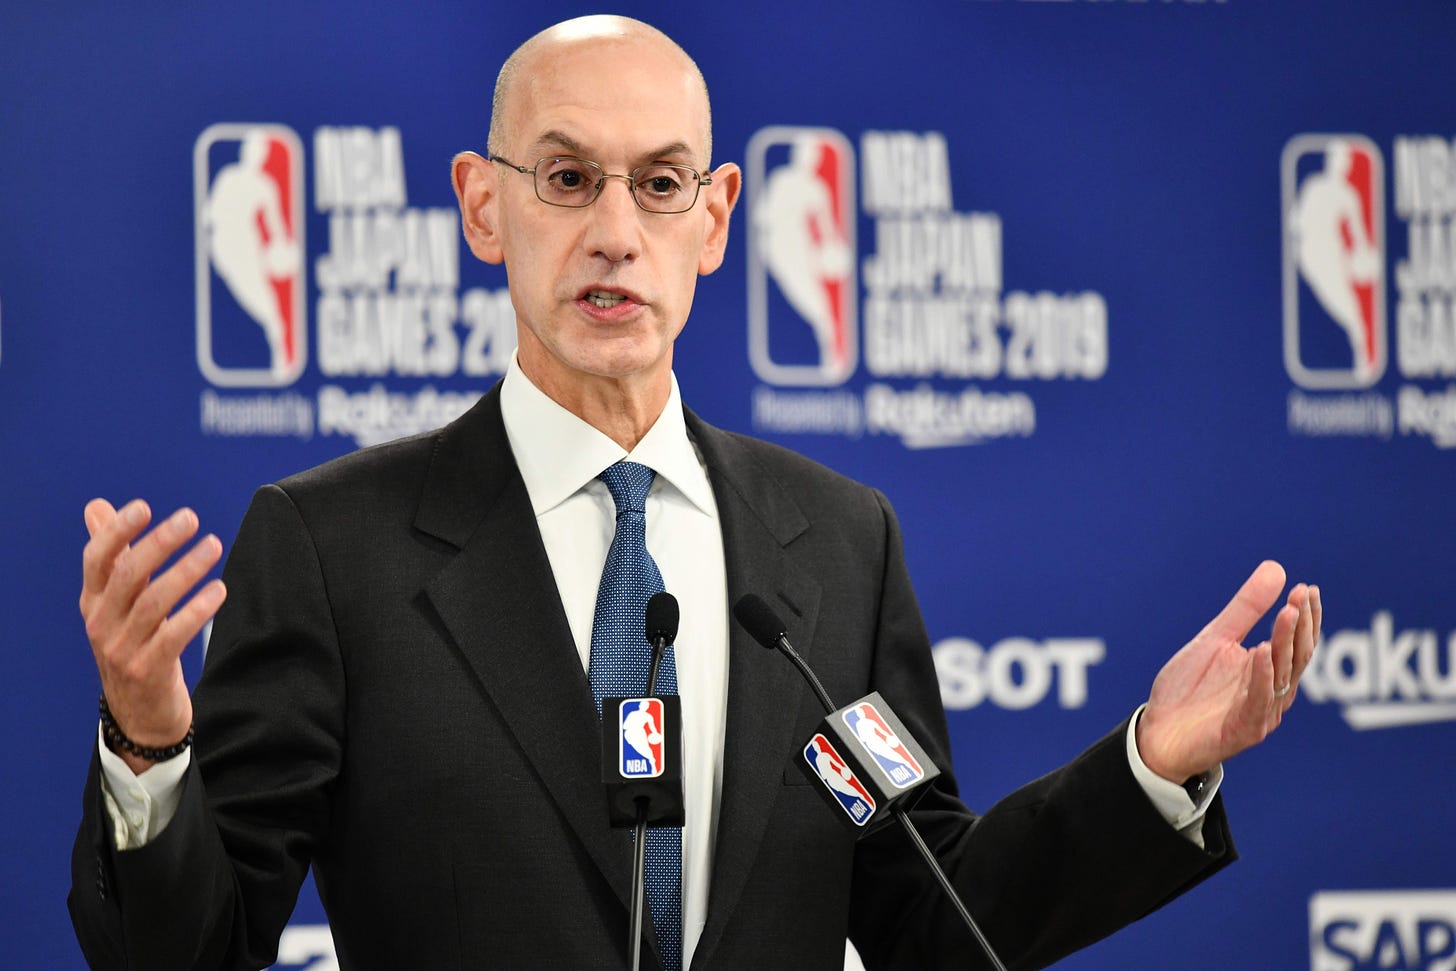 NBA Commissioner Adam Silver wants to meet with China officials